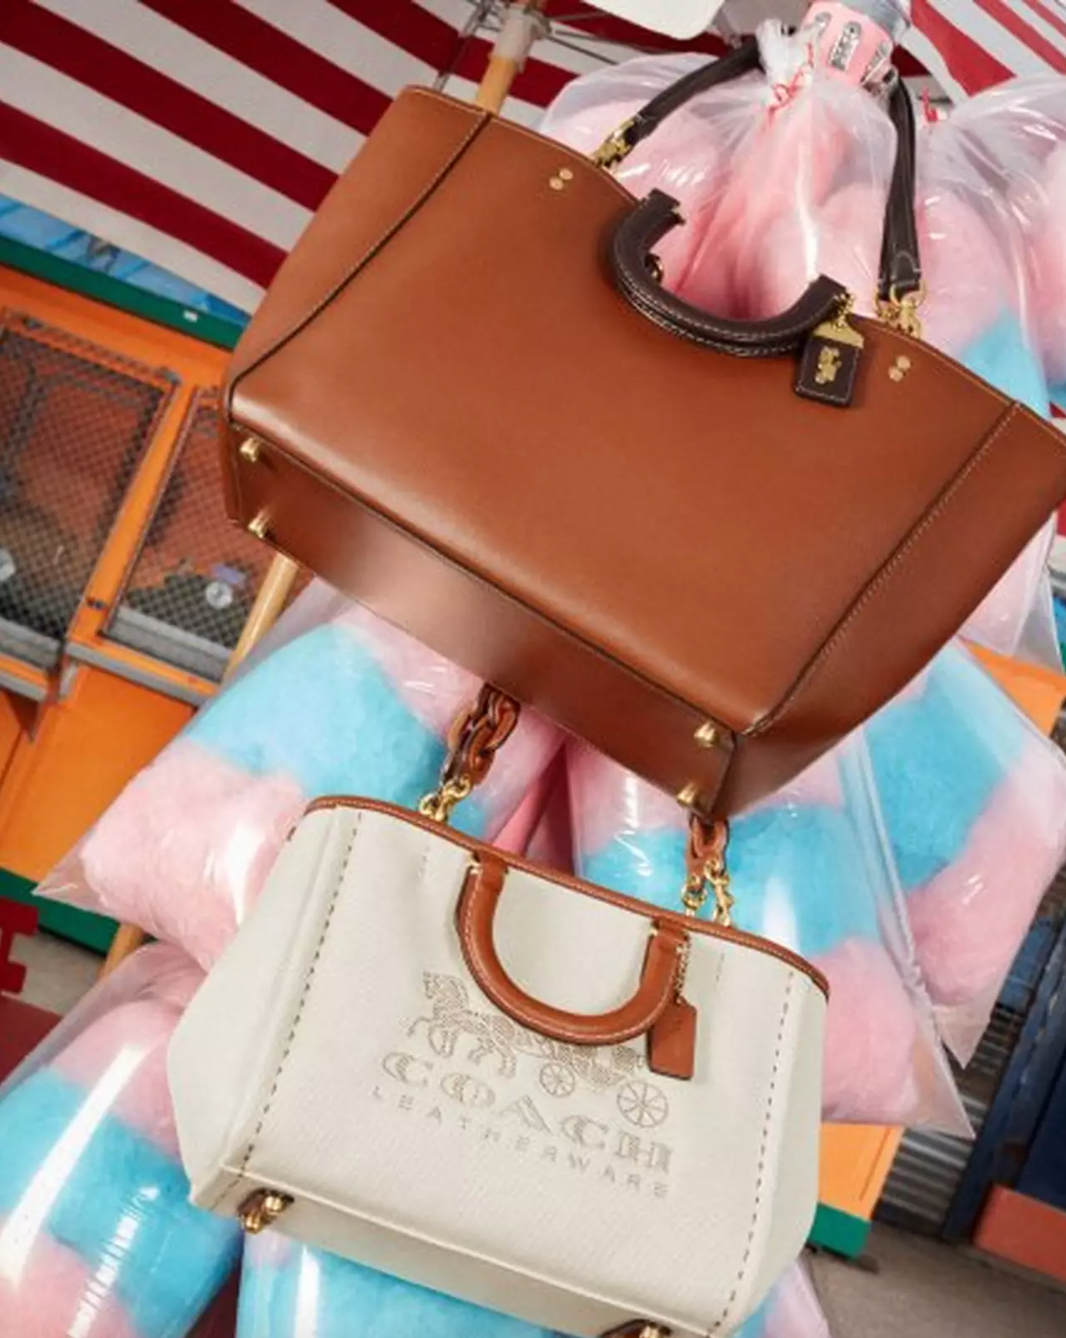 Coach Outlet 'Friends & Family' sale: Handbags, wallets and shoes